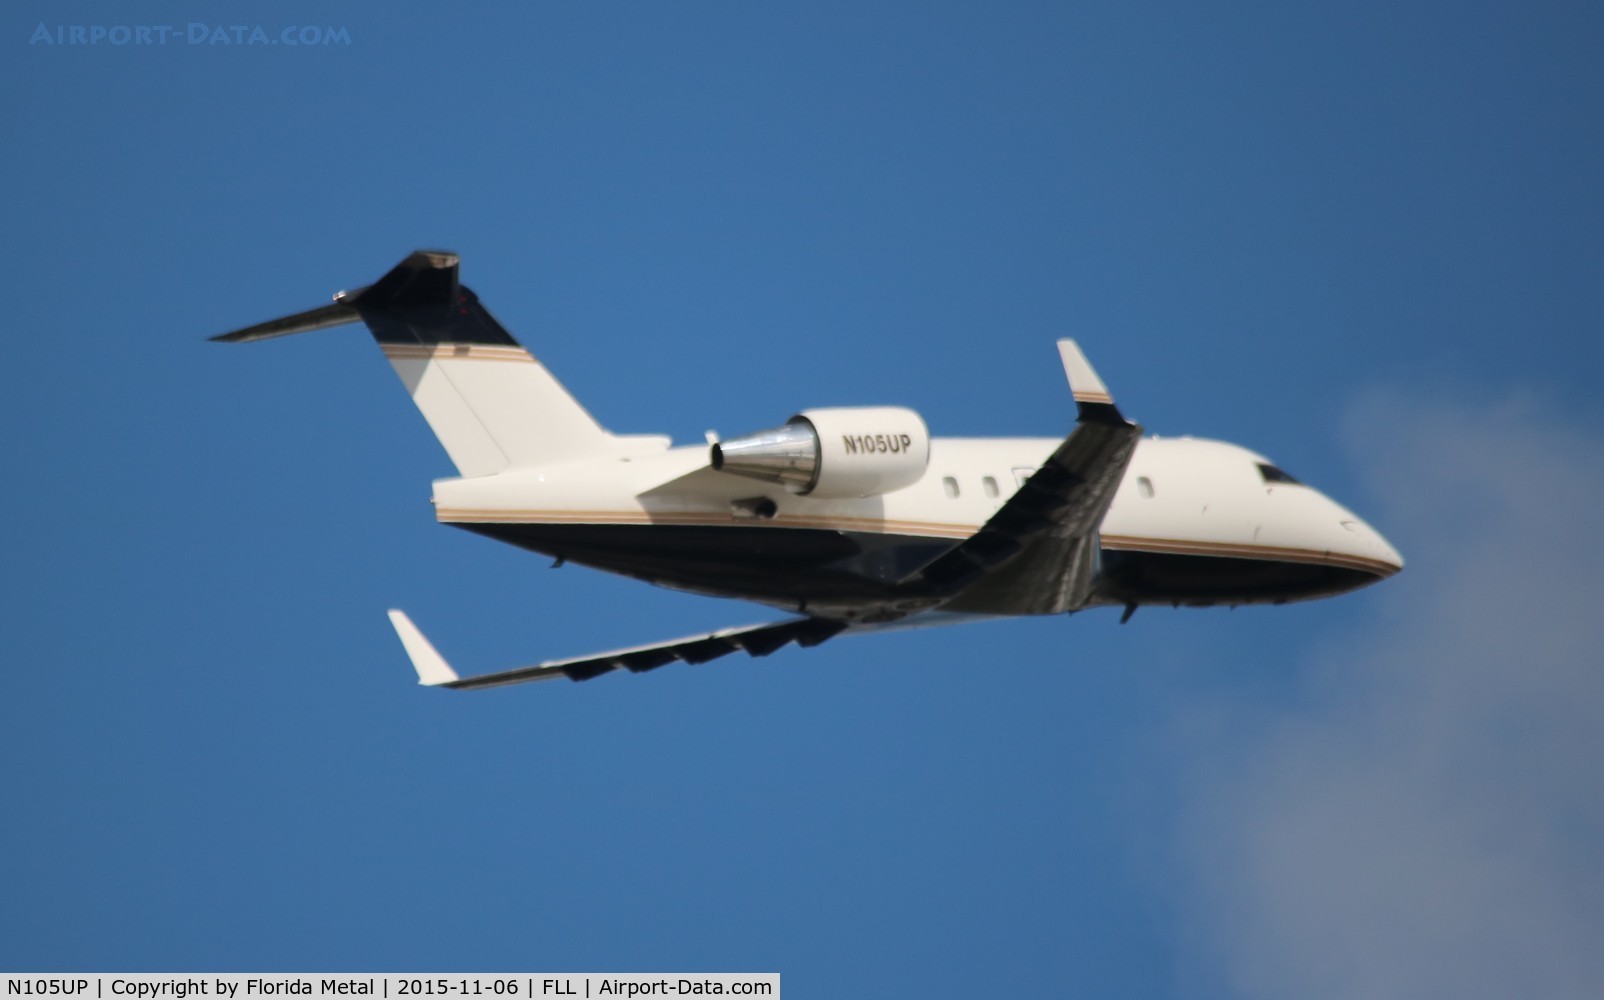 N105UP, 1987 Canadair Challenger 601 (CL-600-2A12) C/N 3066, Challenger 601